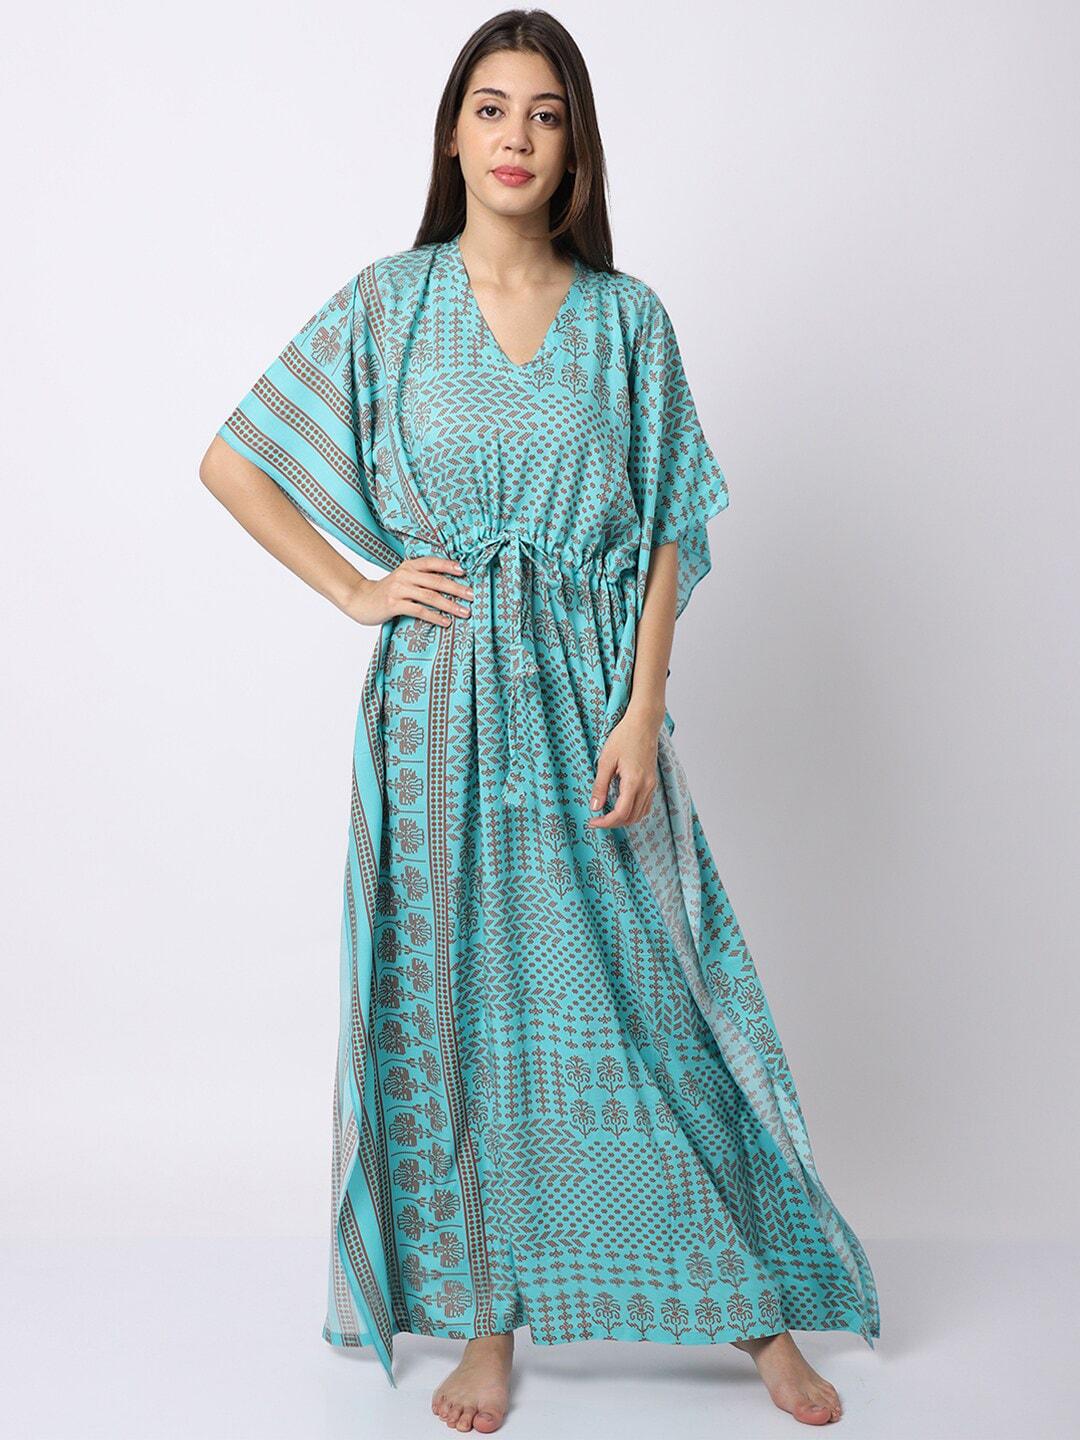 Claura Turquoise Blue Printed Maxi Nightdress